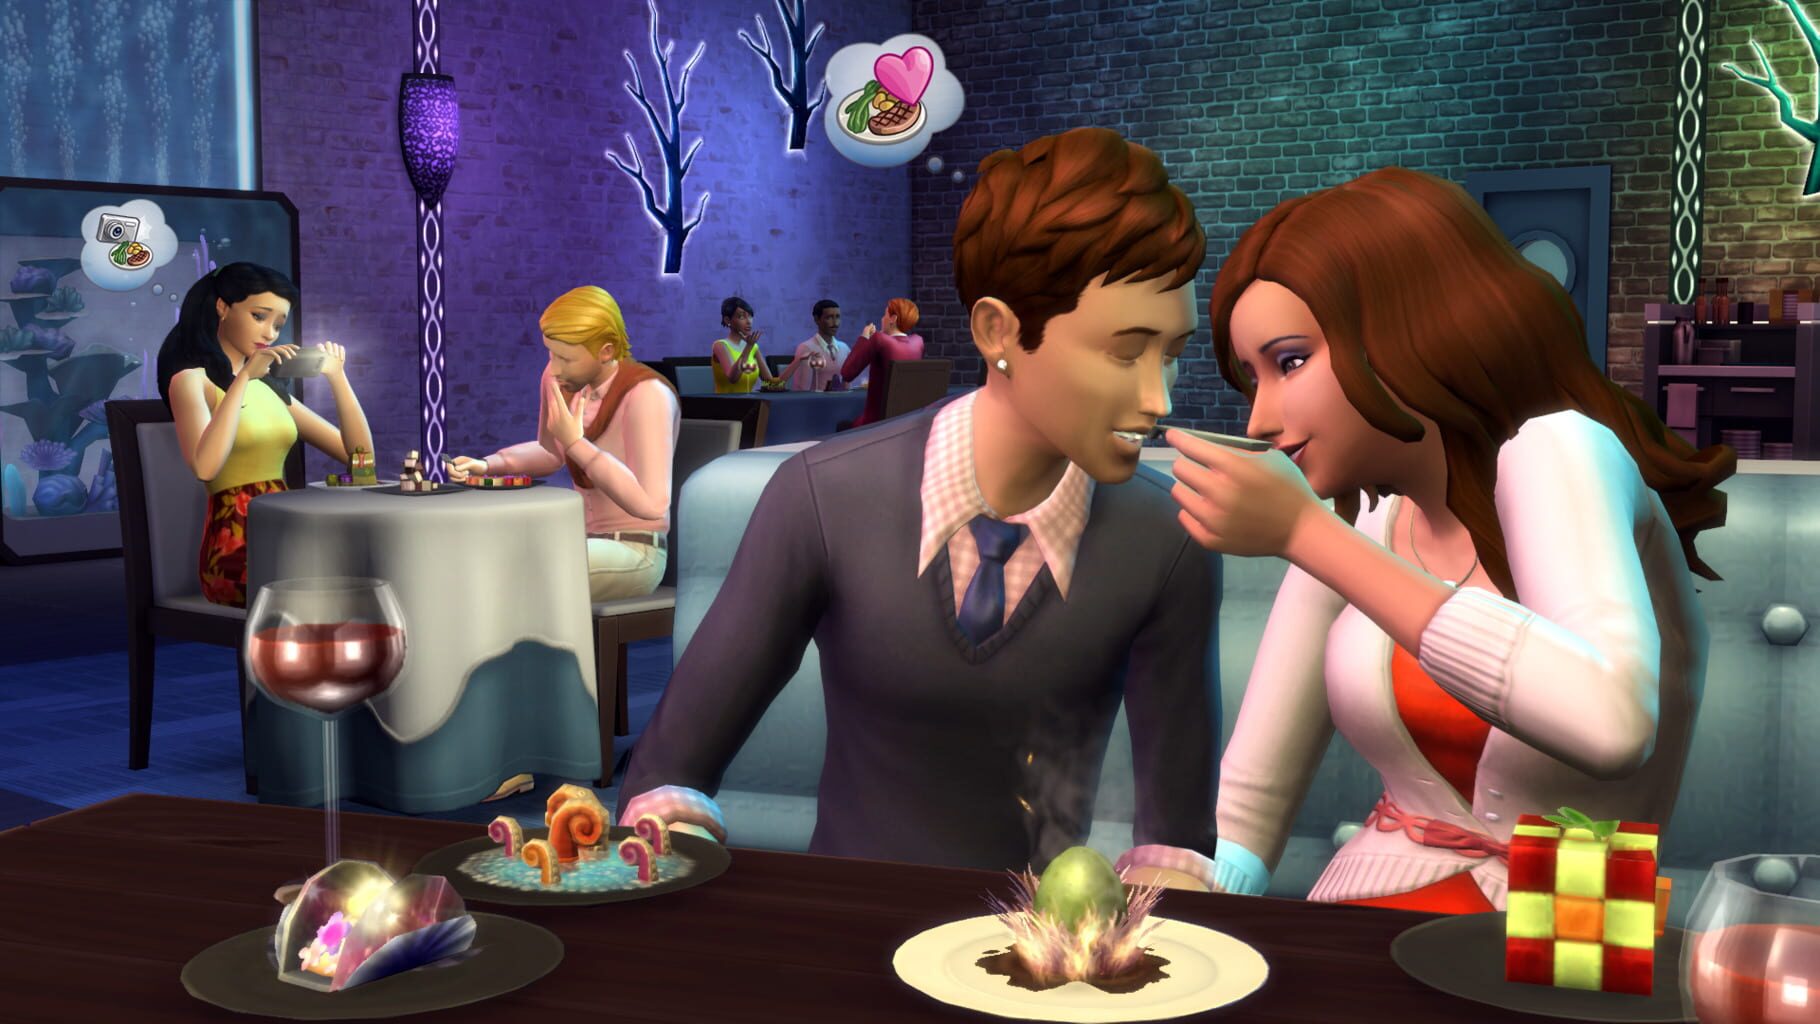 The Sims 4: Dine Out Image